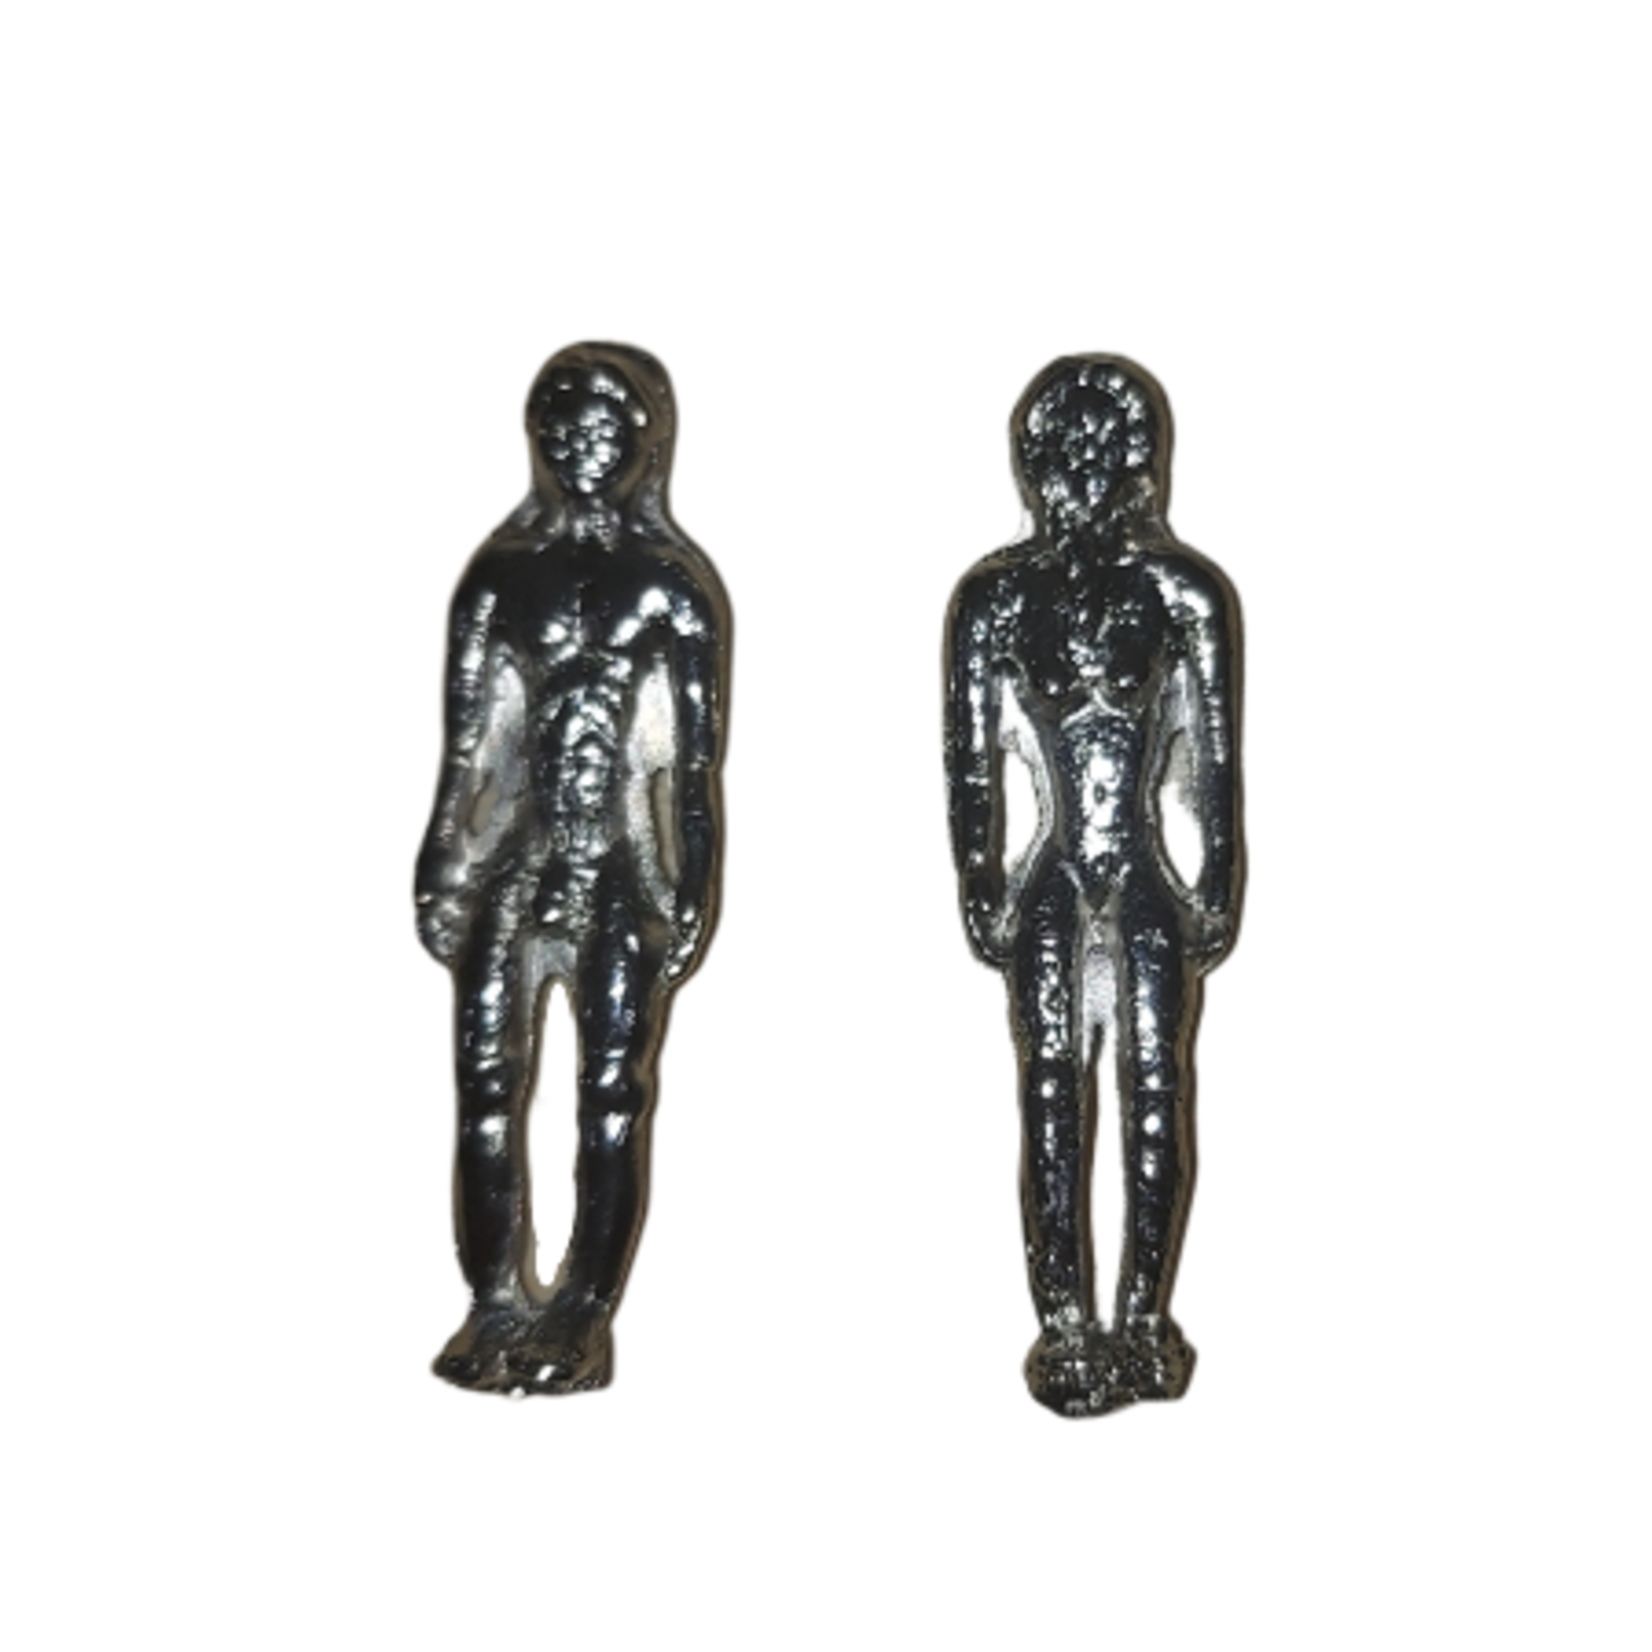 Hombre Y Mujer Amuleto / Man & Woman Amulet